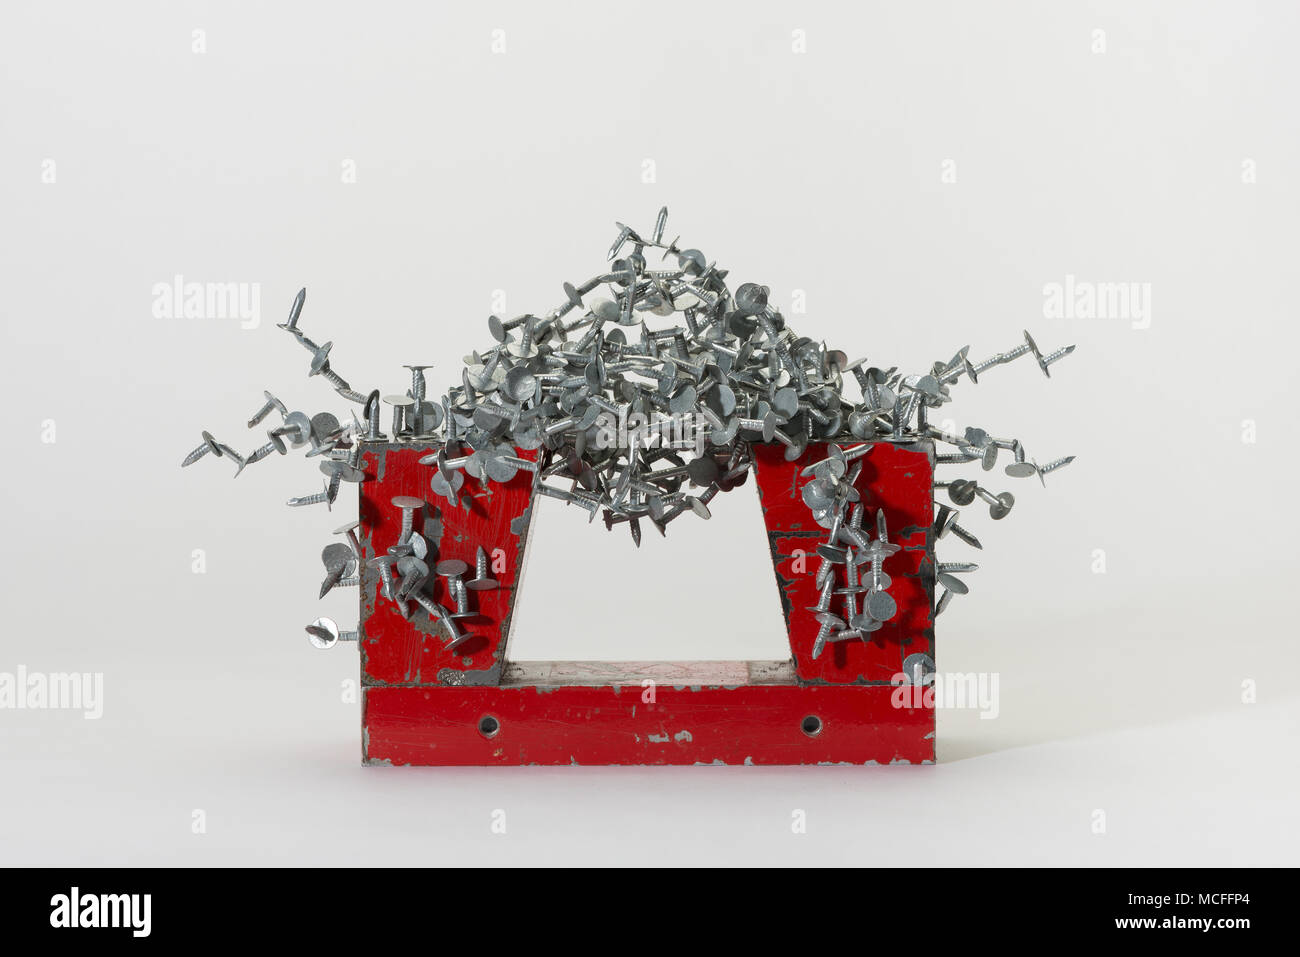 Large industrial powerful horseshoe magnet made from component parts attracting iron nails, galvanised staples, clouts demonstrating magnetic field Stock Photo